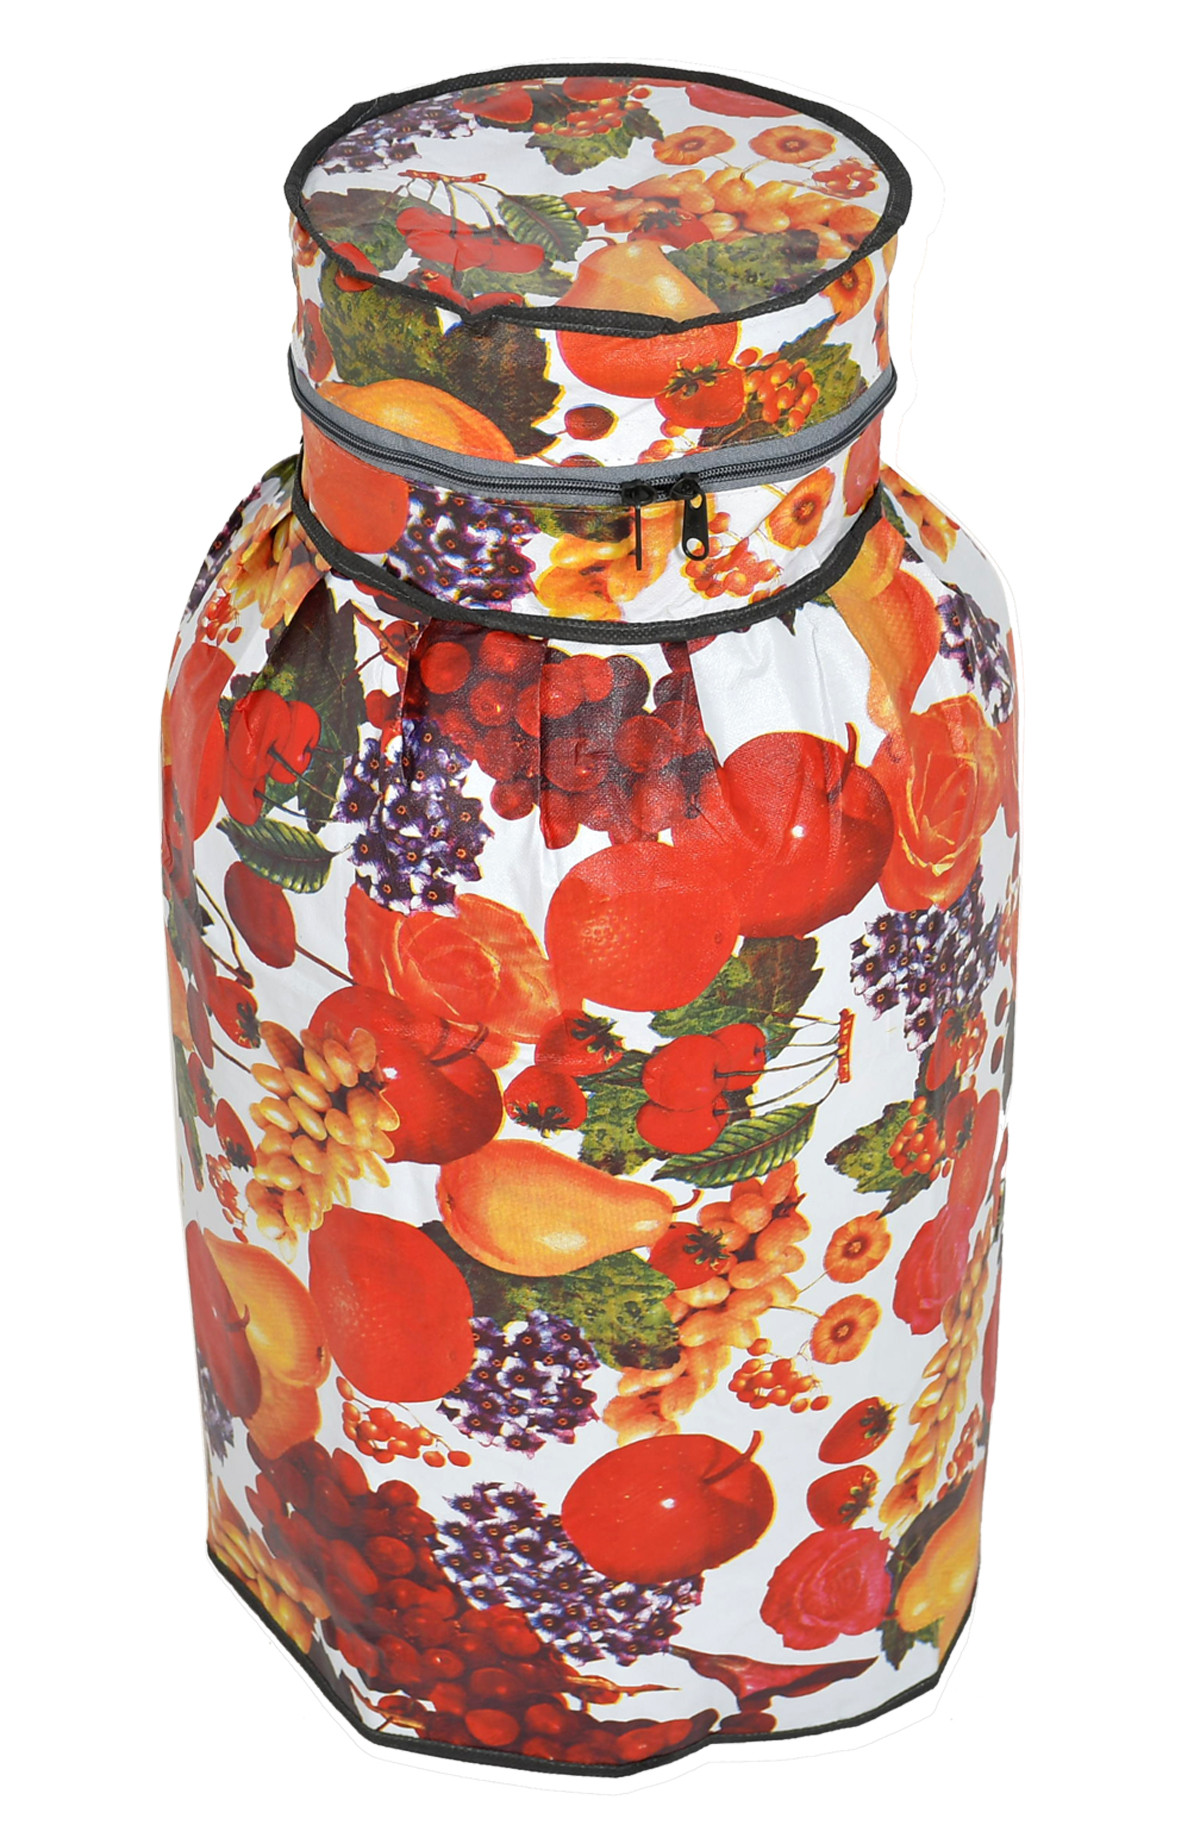 Kuber Industries Fruit Printed PVC Lpg Gas Cylinder Cover (Multicolour)-HS43KUBMART25617